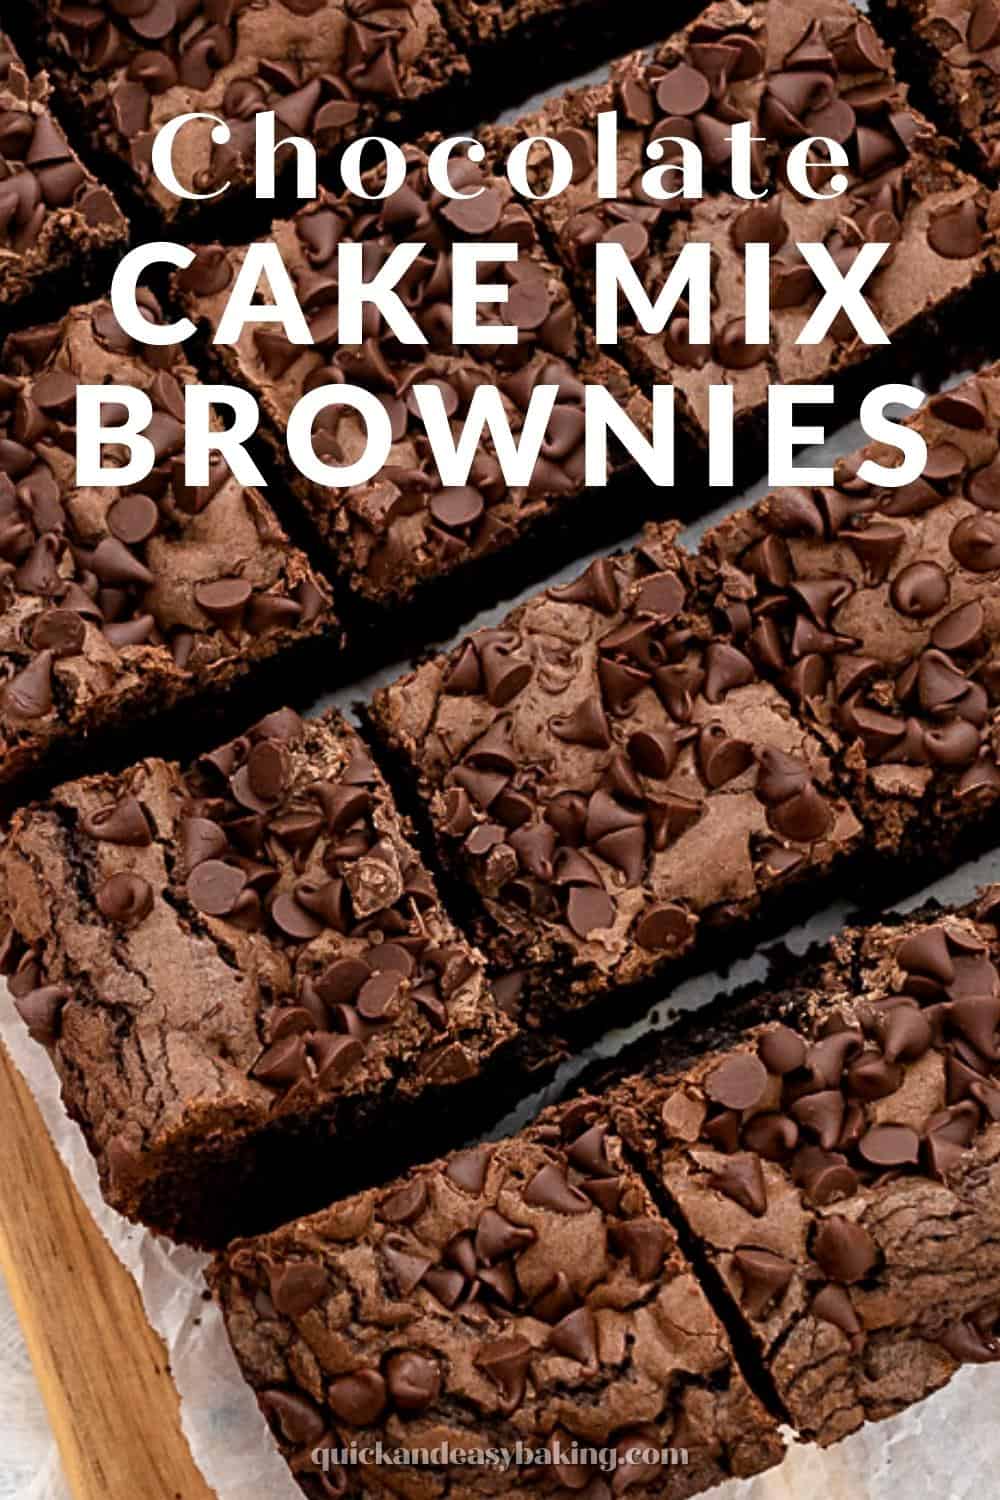 Chocolate cake mix brownies top view with text image.